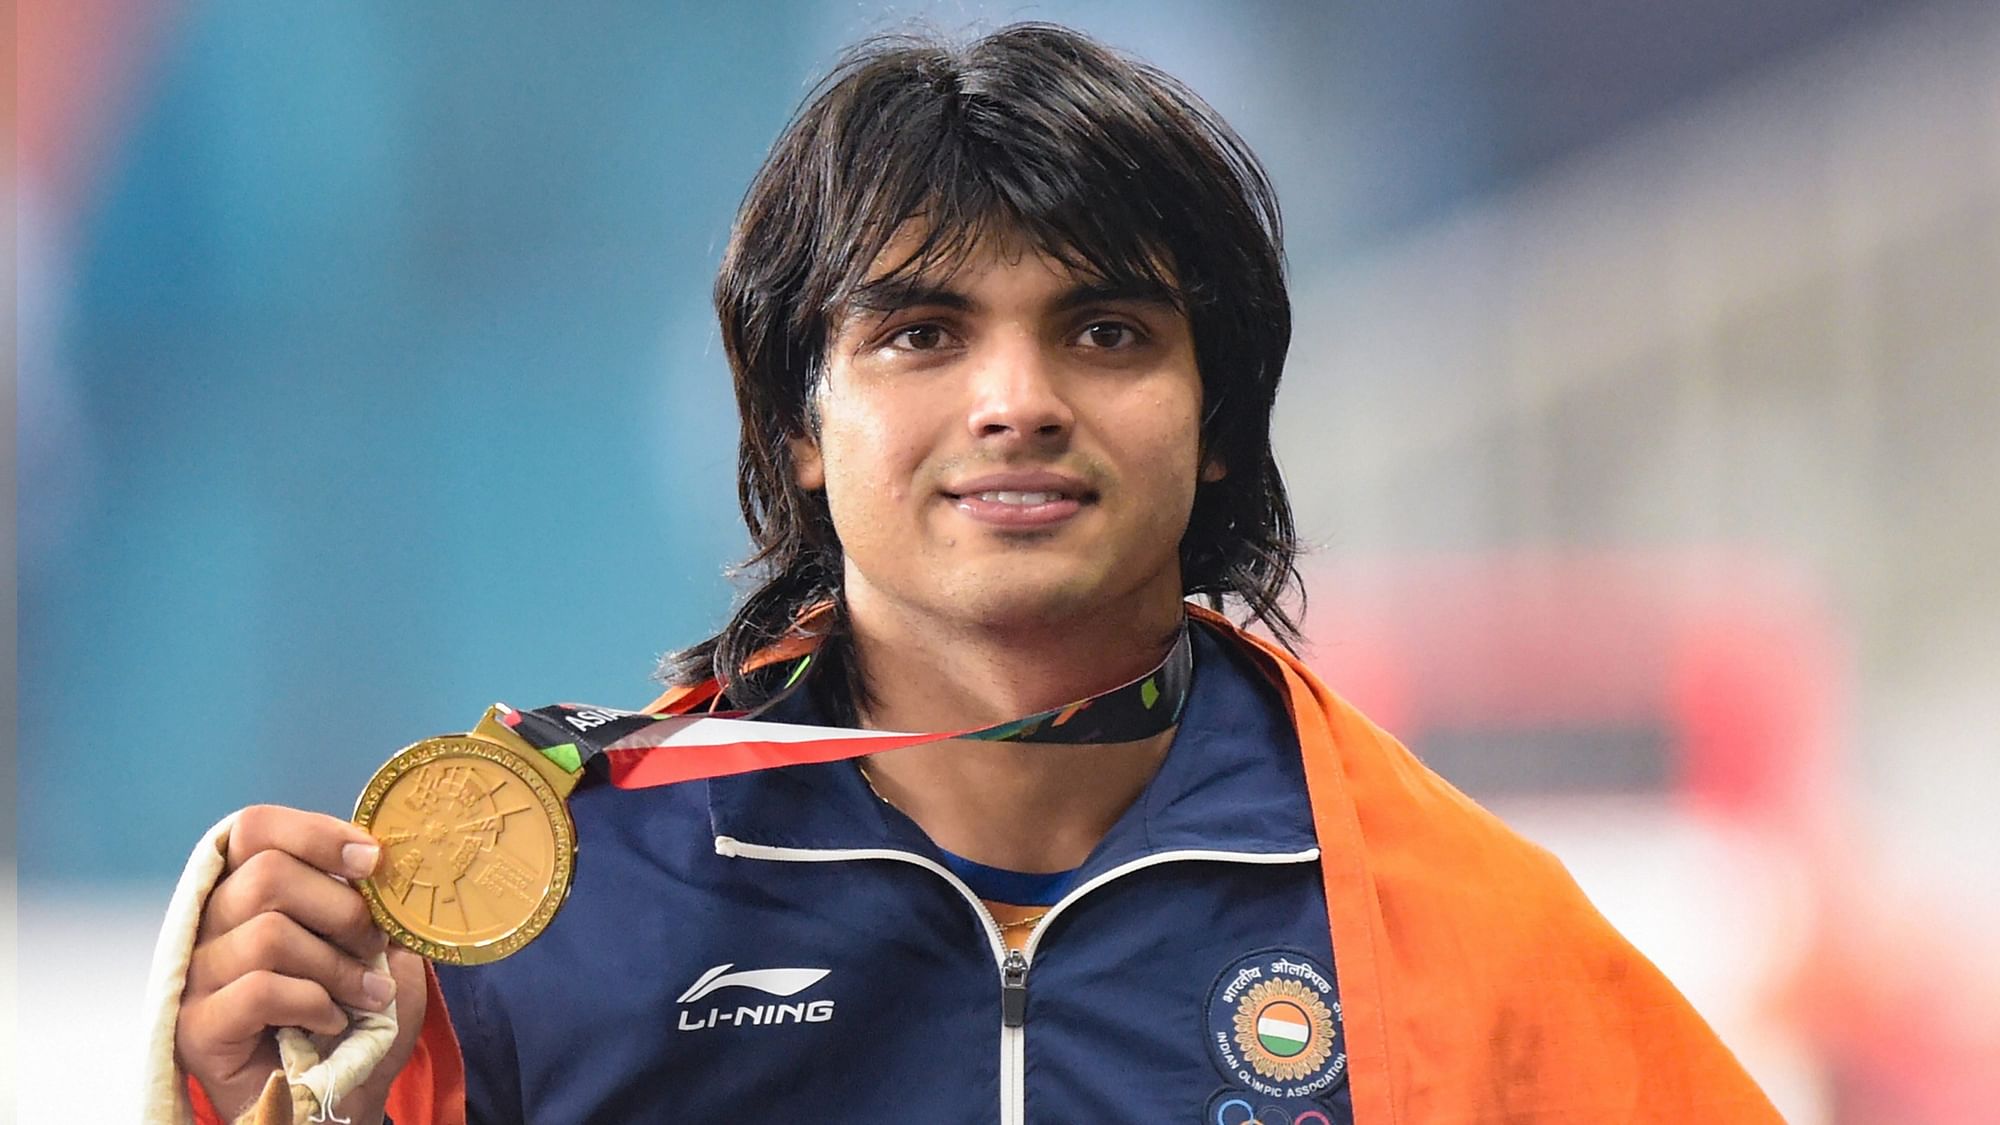 Neeraj Chopra has qualified for the Tokyo 2020 Olympics with a throw of 87.86m at the Athletics Central North East meeting in South Africa.